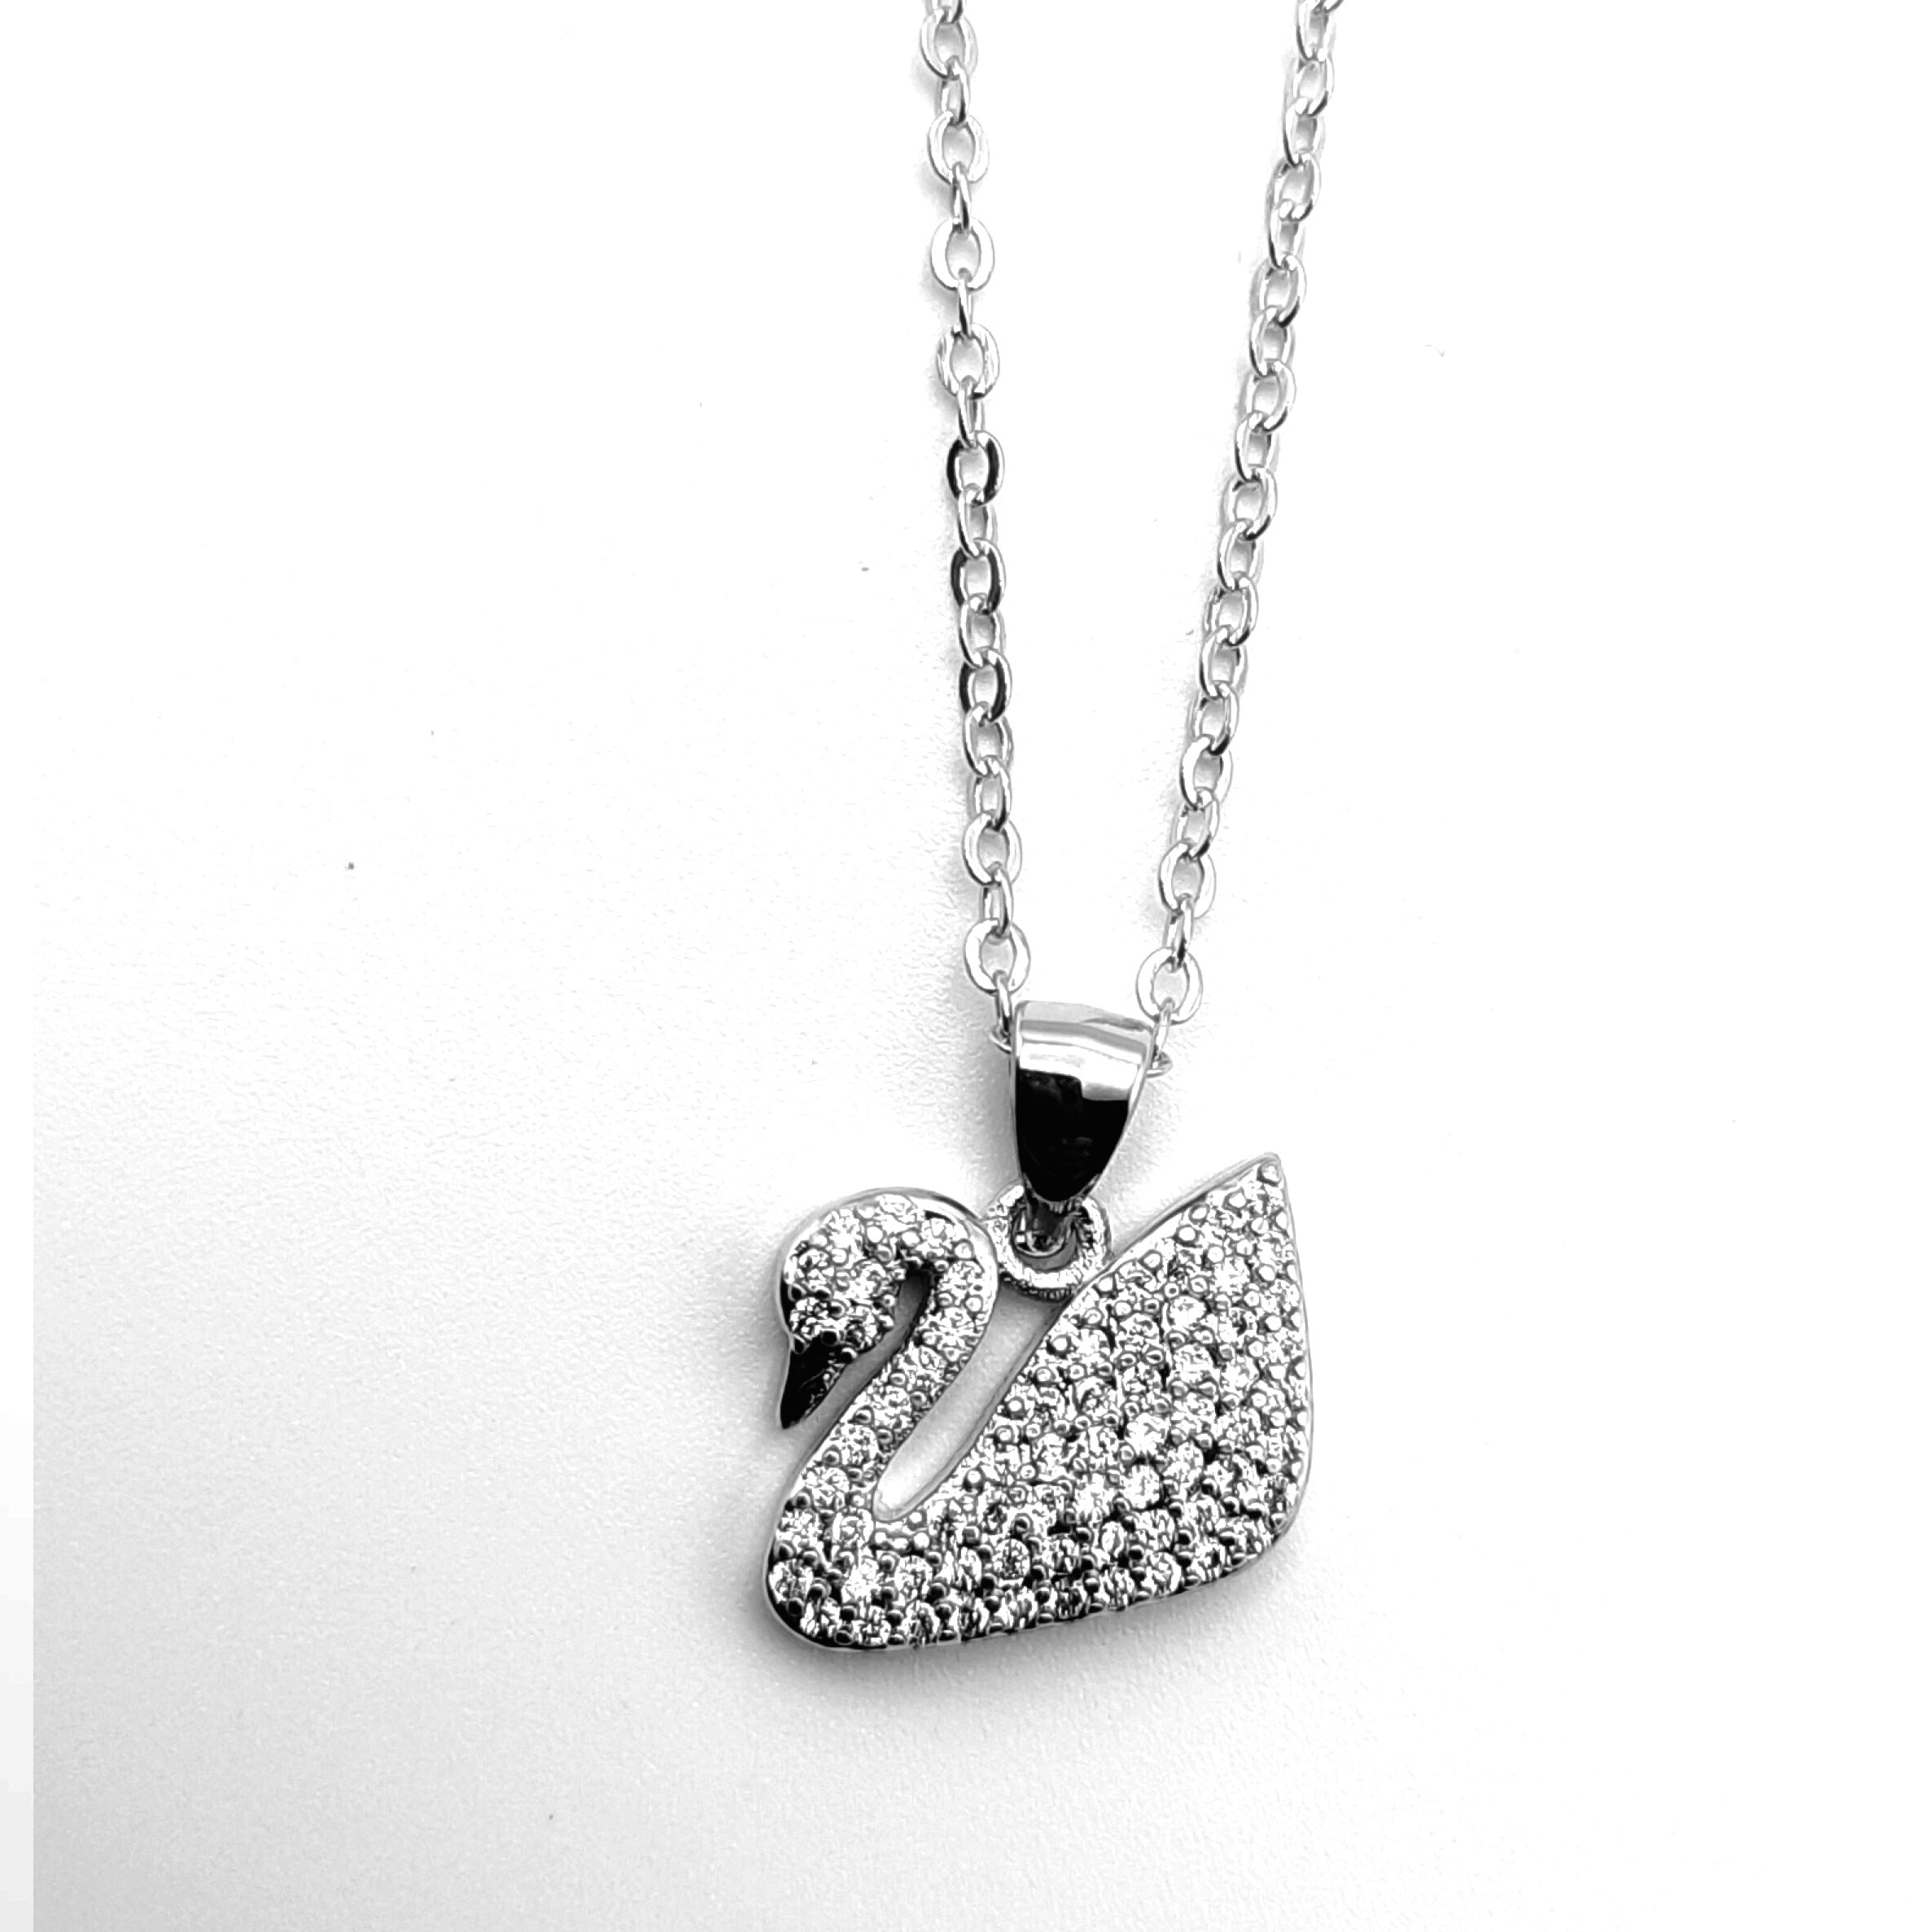 Iconic Swan Necklace